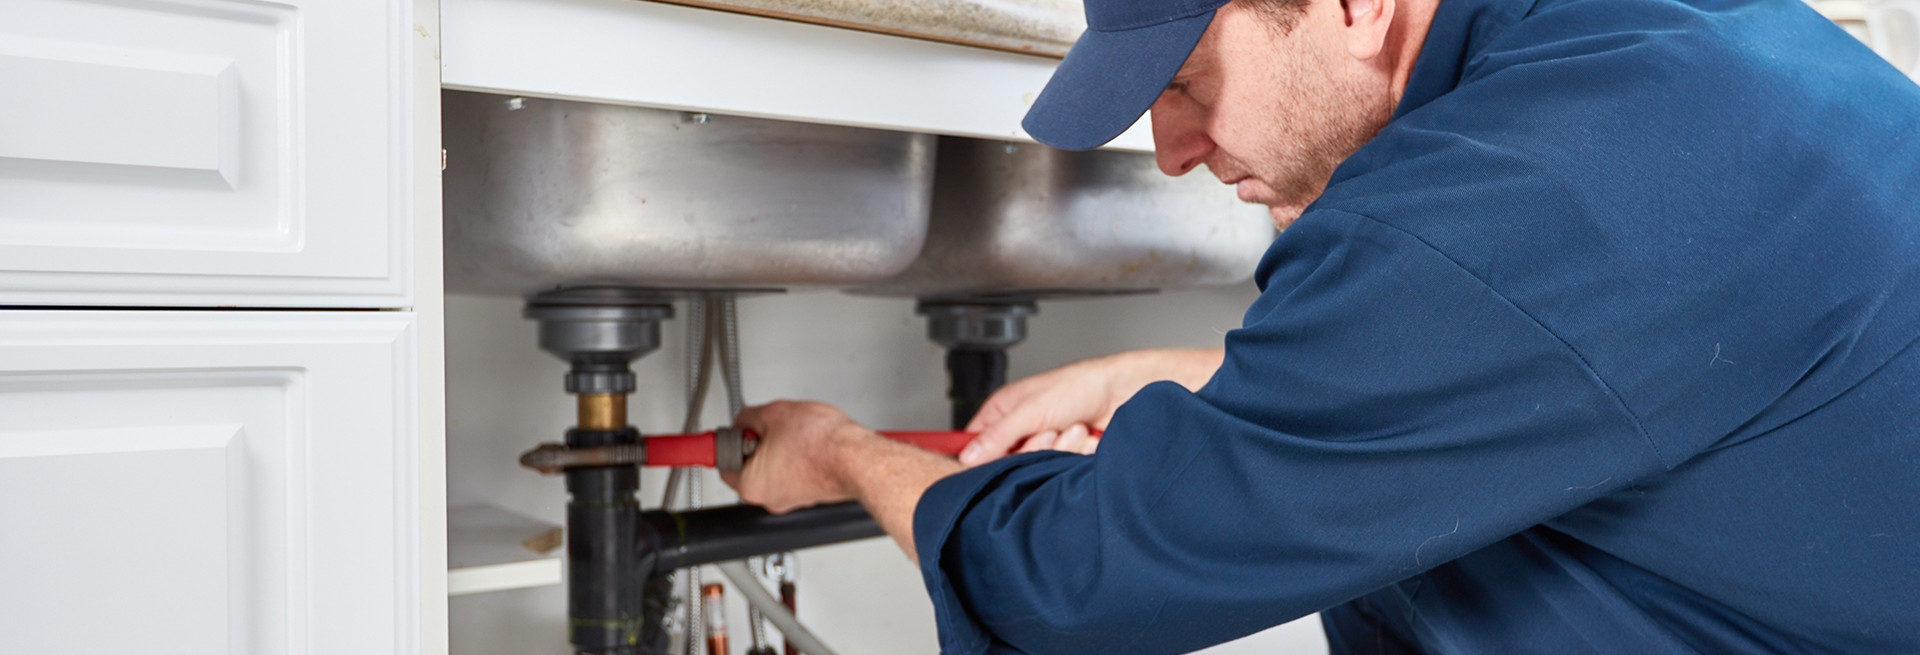 Leak Detection professional providing residential water leak detection services in Indianapolis